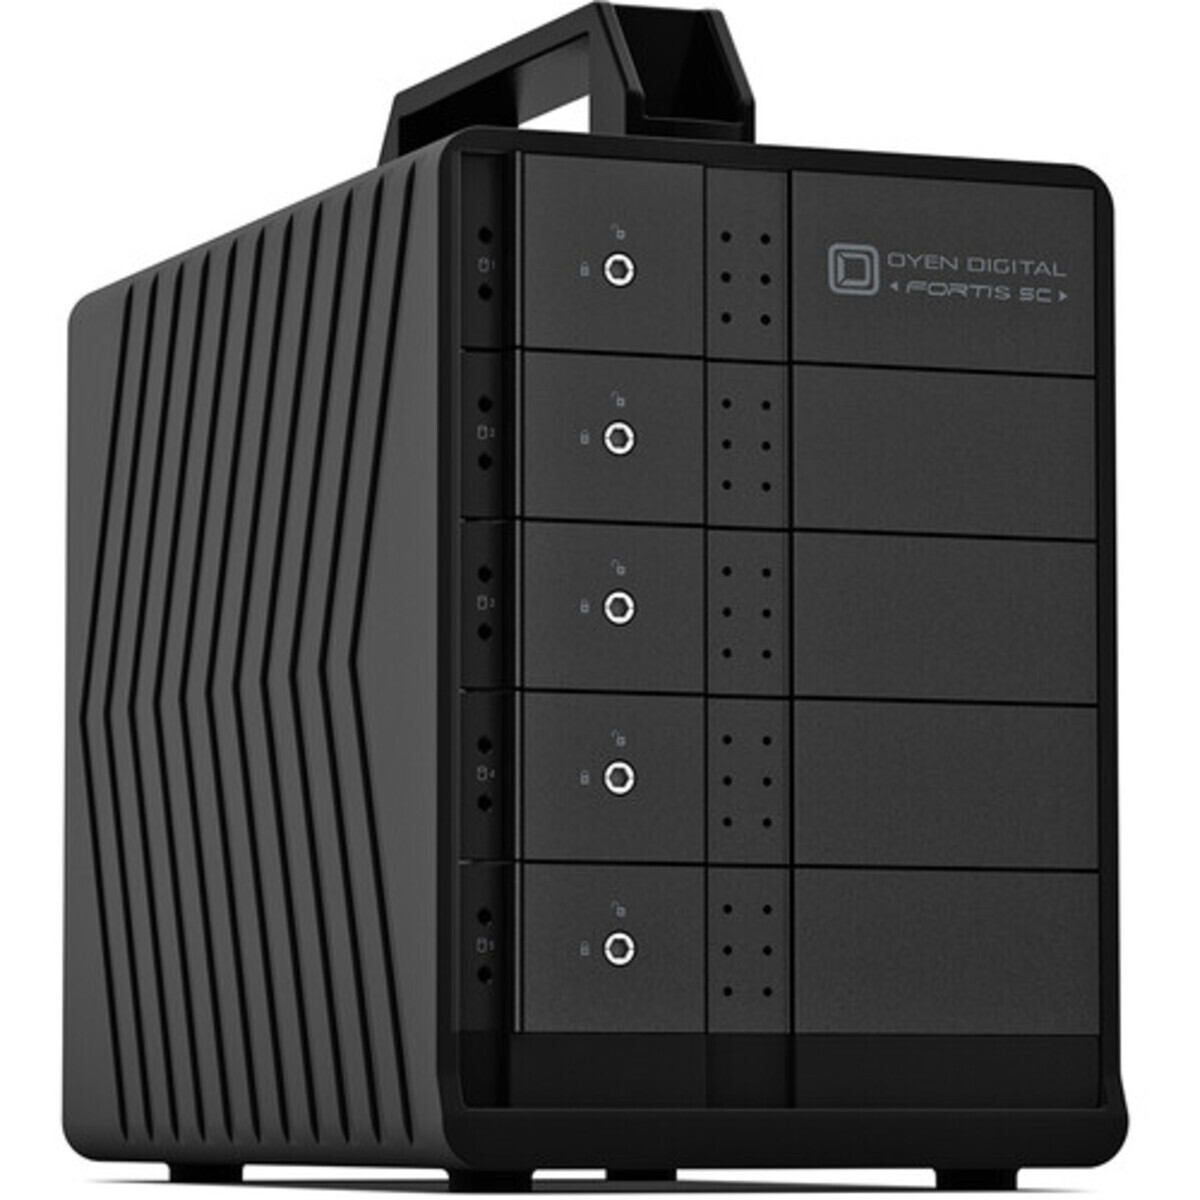 buy OYEN Fortis 5C 5tb Desktop DAS - Direct Attached Storage Device 5x1000gb Samsung 870 EVO MZ-77E1T0BAM 2.5 560/530MB/s SATA 6Gb/s SSD CONSUMER Class Drives Installed - Burn-In Tested - nas headquarters buy network attached storage server device das new raid-5 free shipping usa spring sale Fortis 5C